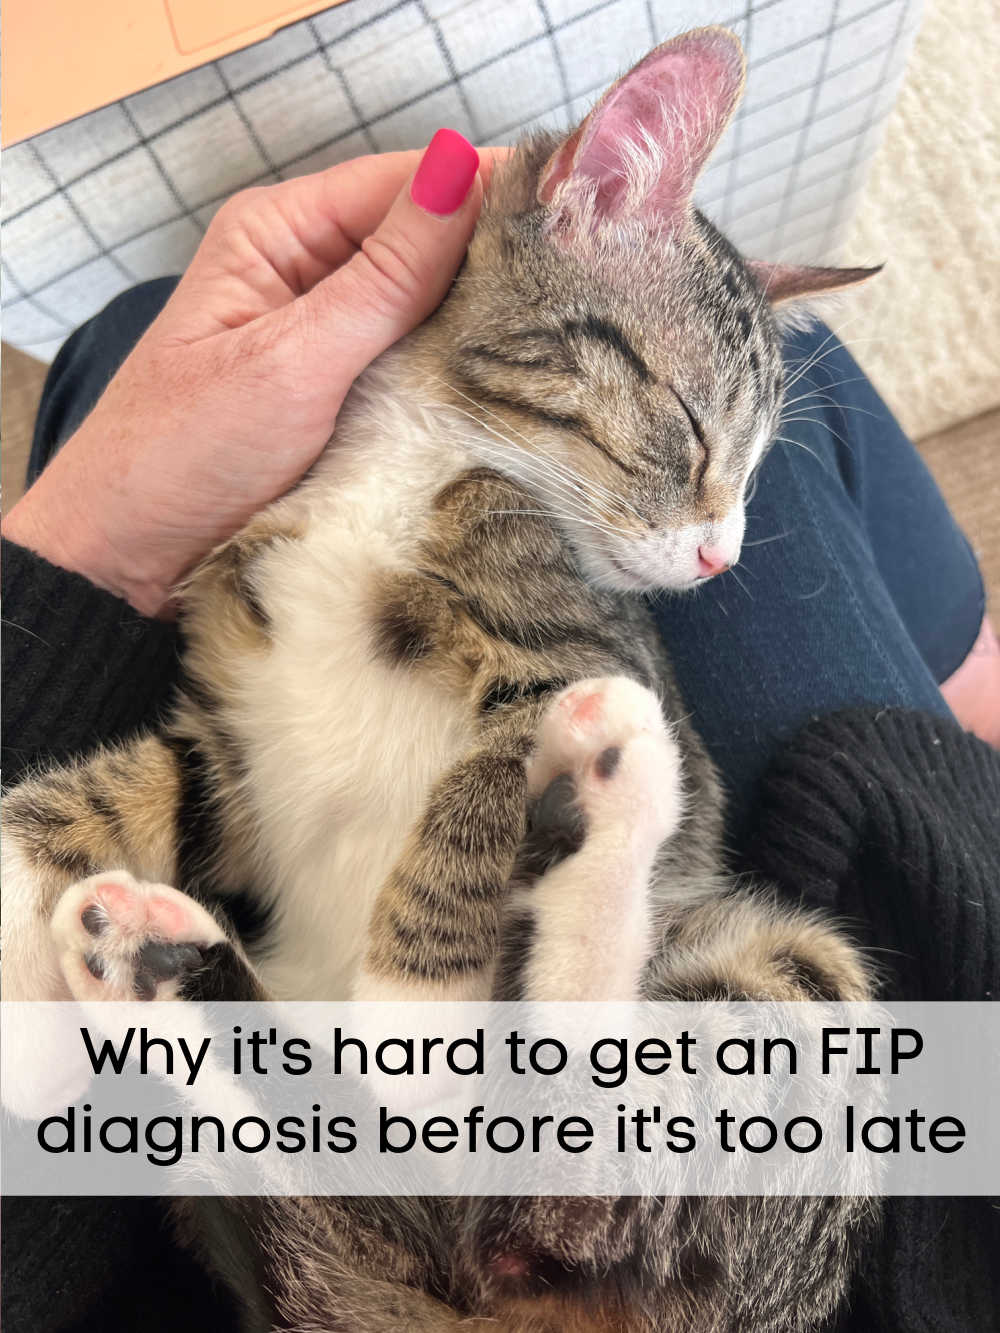 Saving My FIP Kitten. My kitten was diagnosed with the fatal FIP disease but there are options. Here's what we are doing to save her.